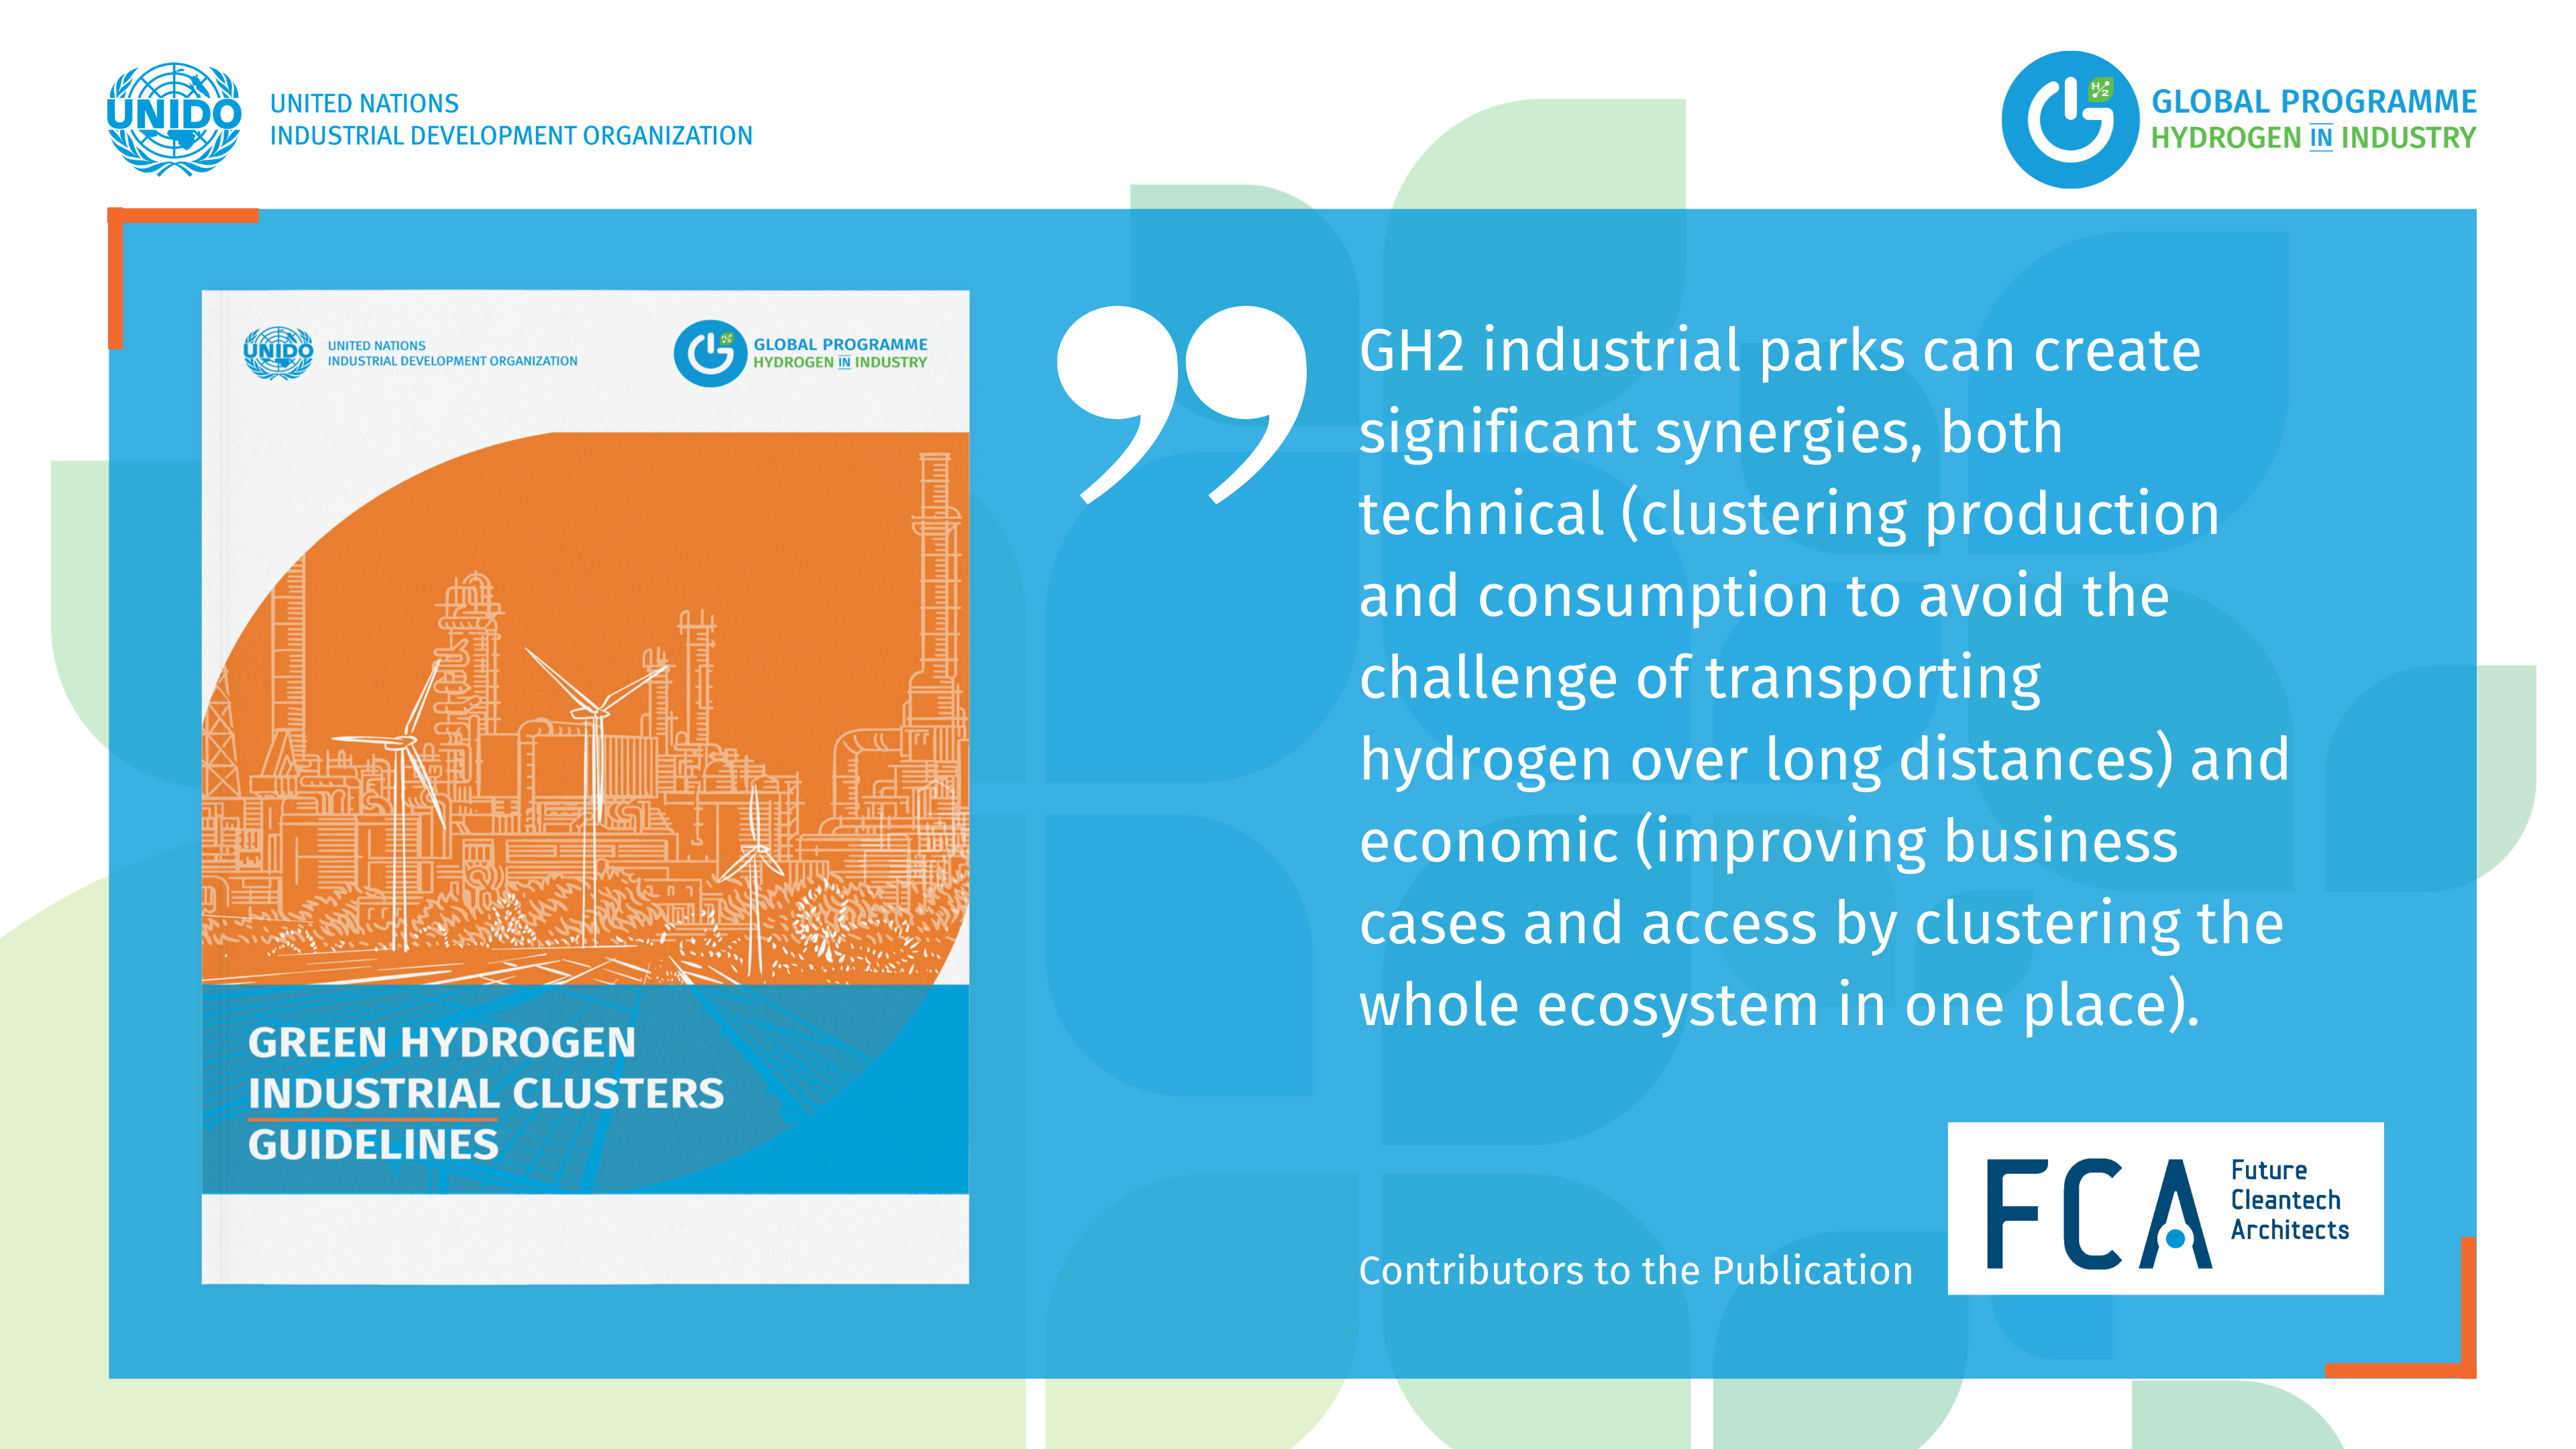 Future Cleantech Architects supports new UNIDO report on Green Hydrogen Industrial Clusters